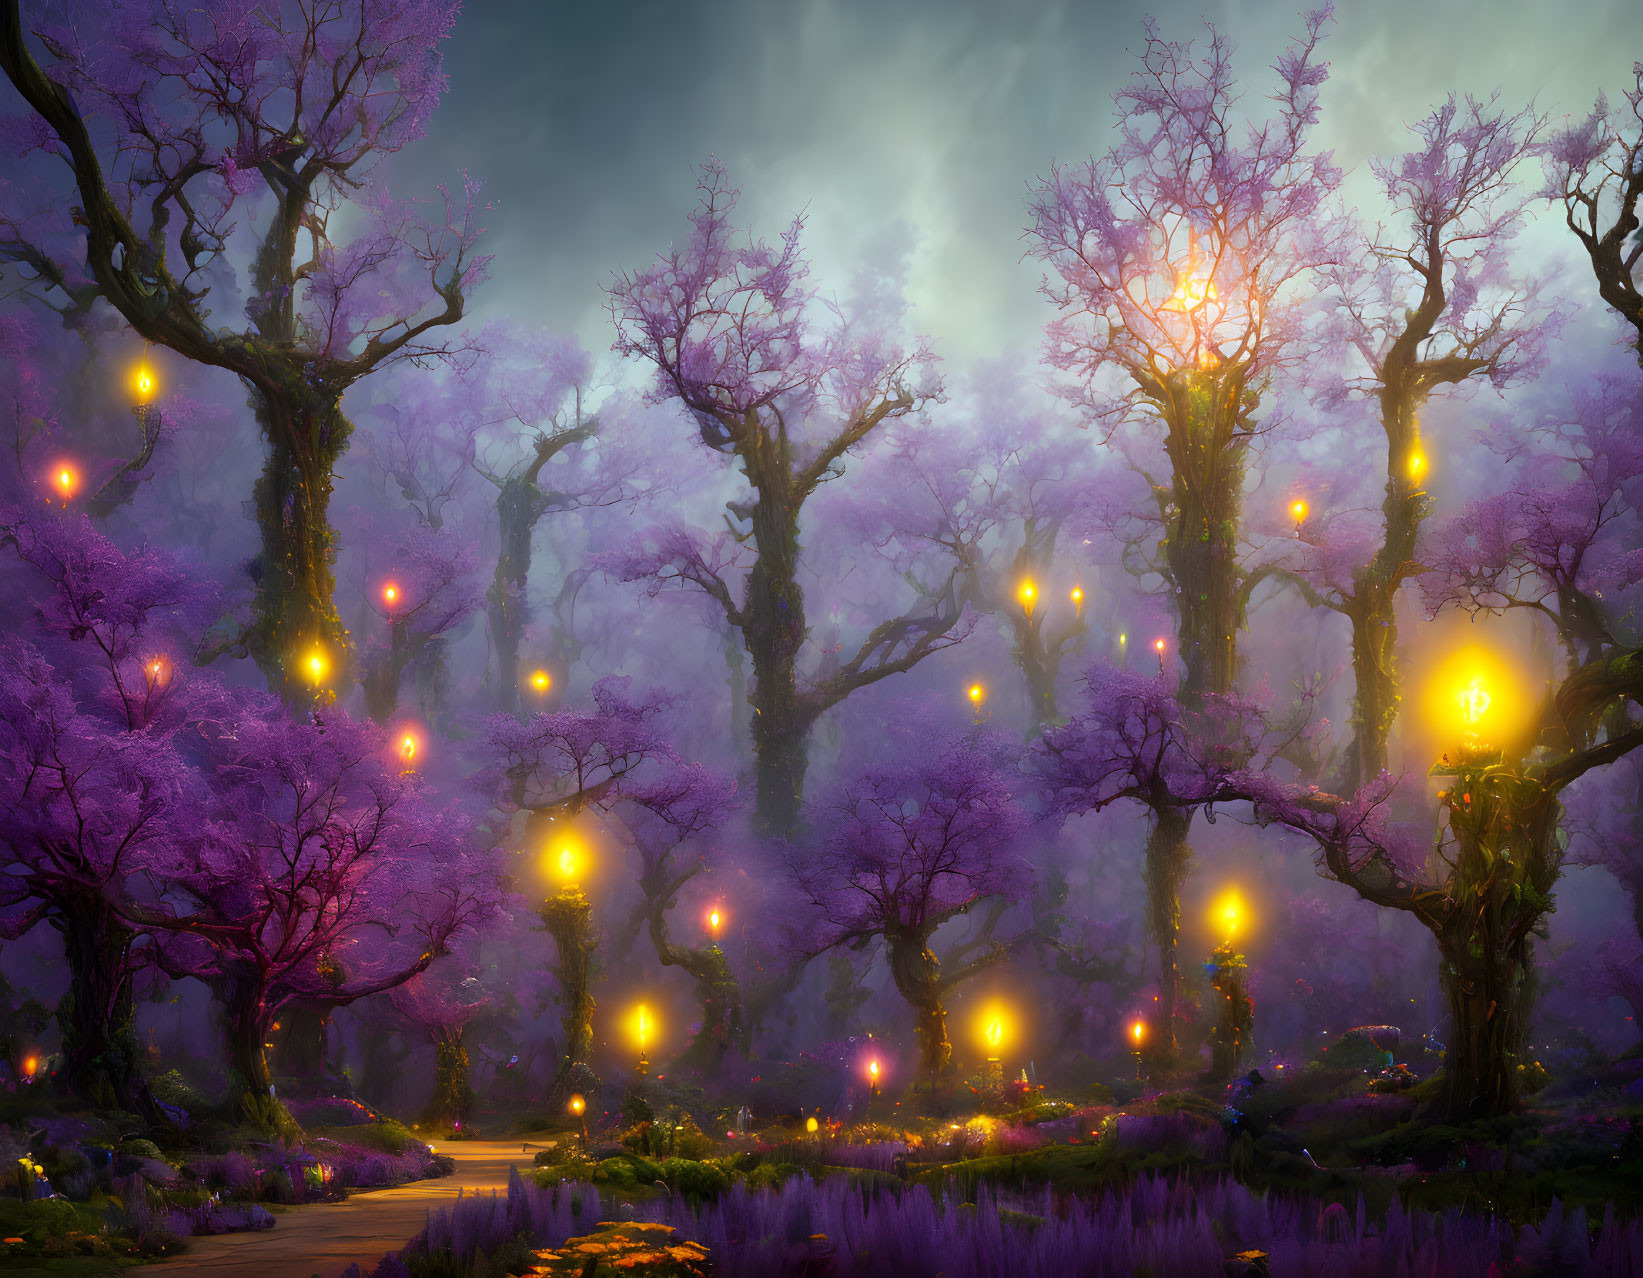 Enchanting forest path with purple trees and glowing lanterns